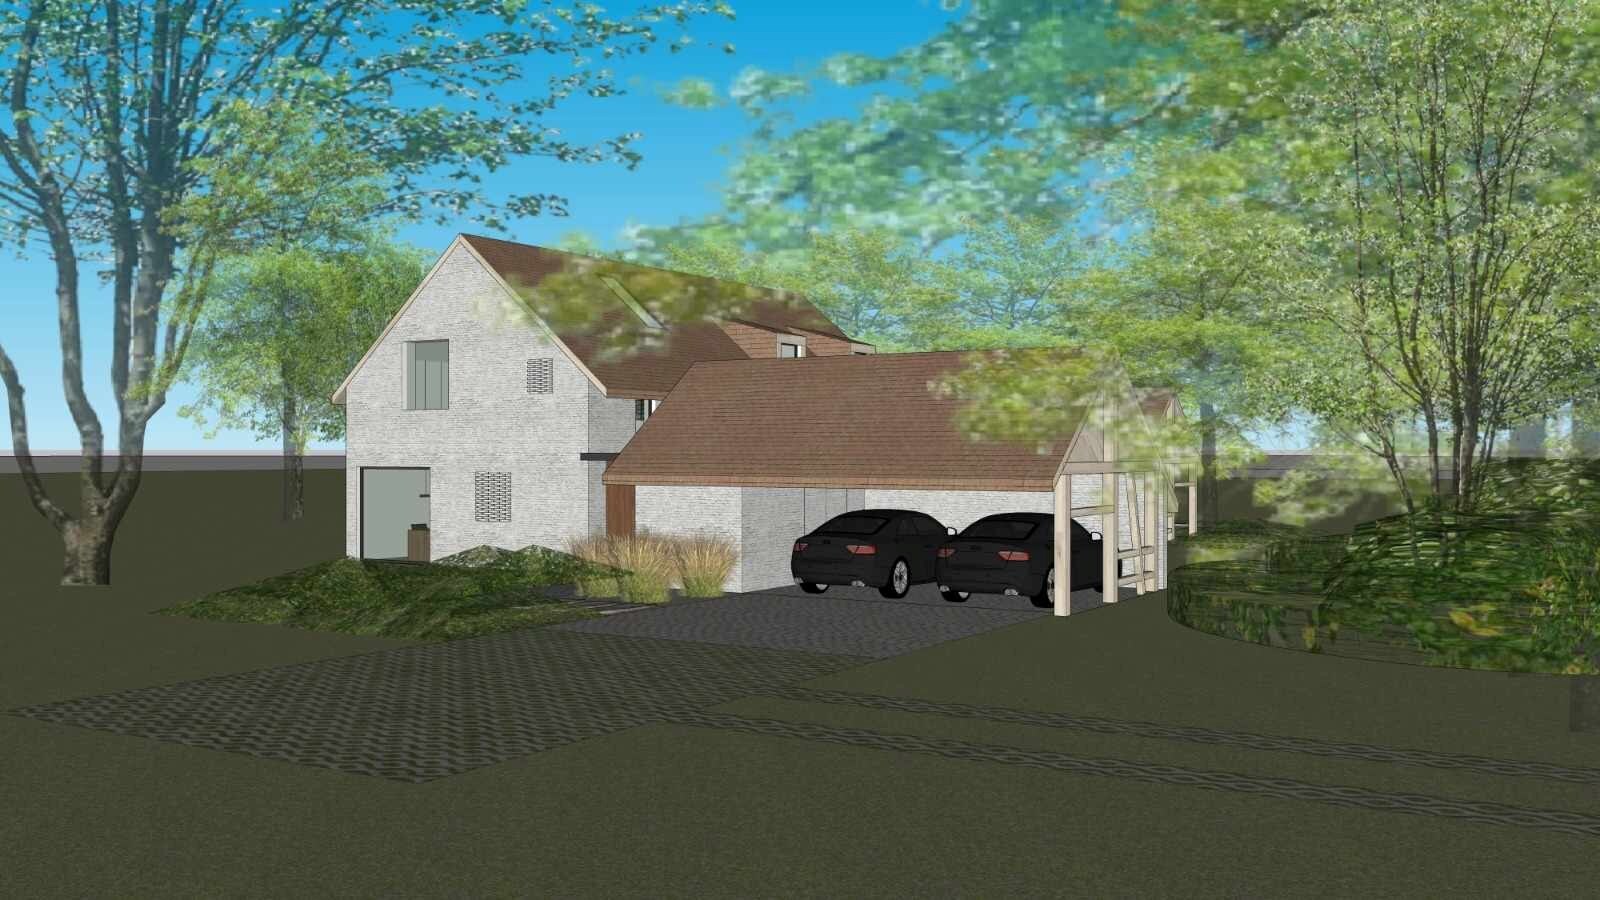 Project plot with license for professional horse keeping and house to be renovated on approximately 9ha in Neerpelt 